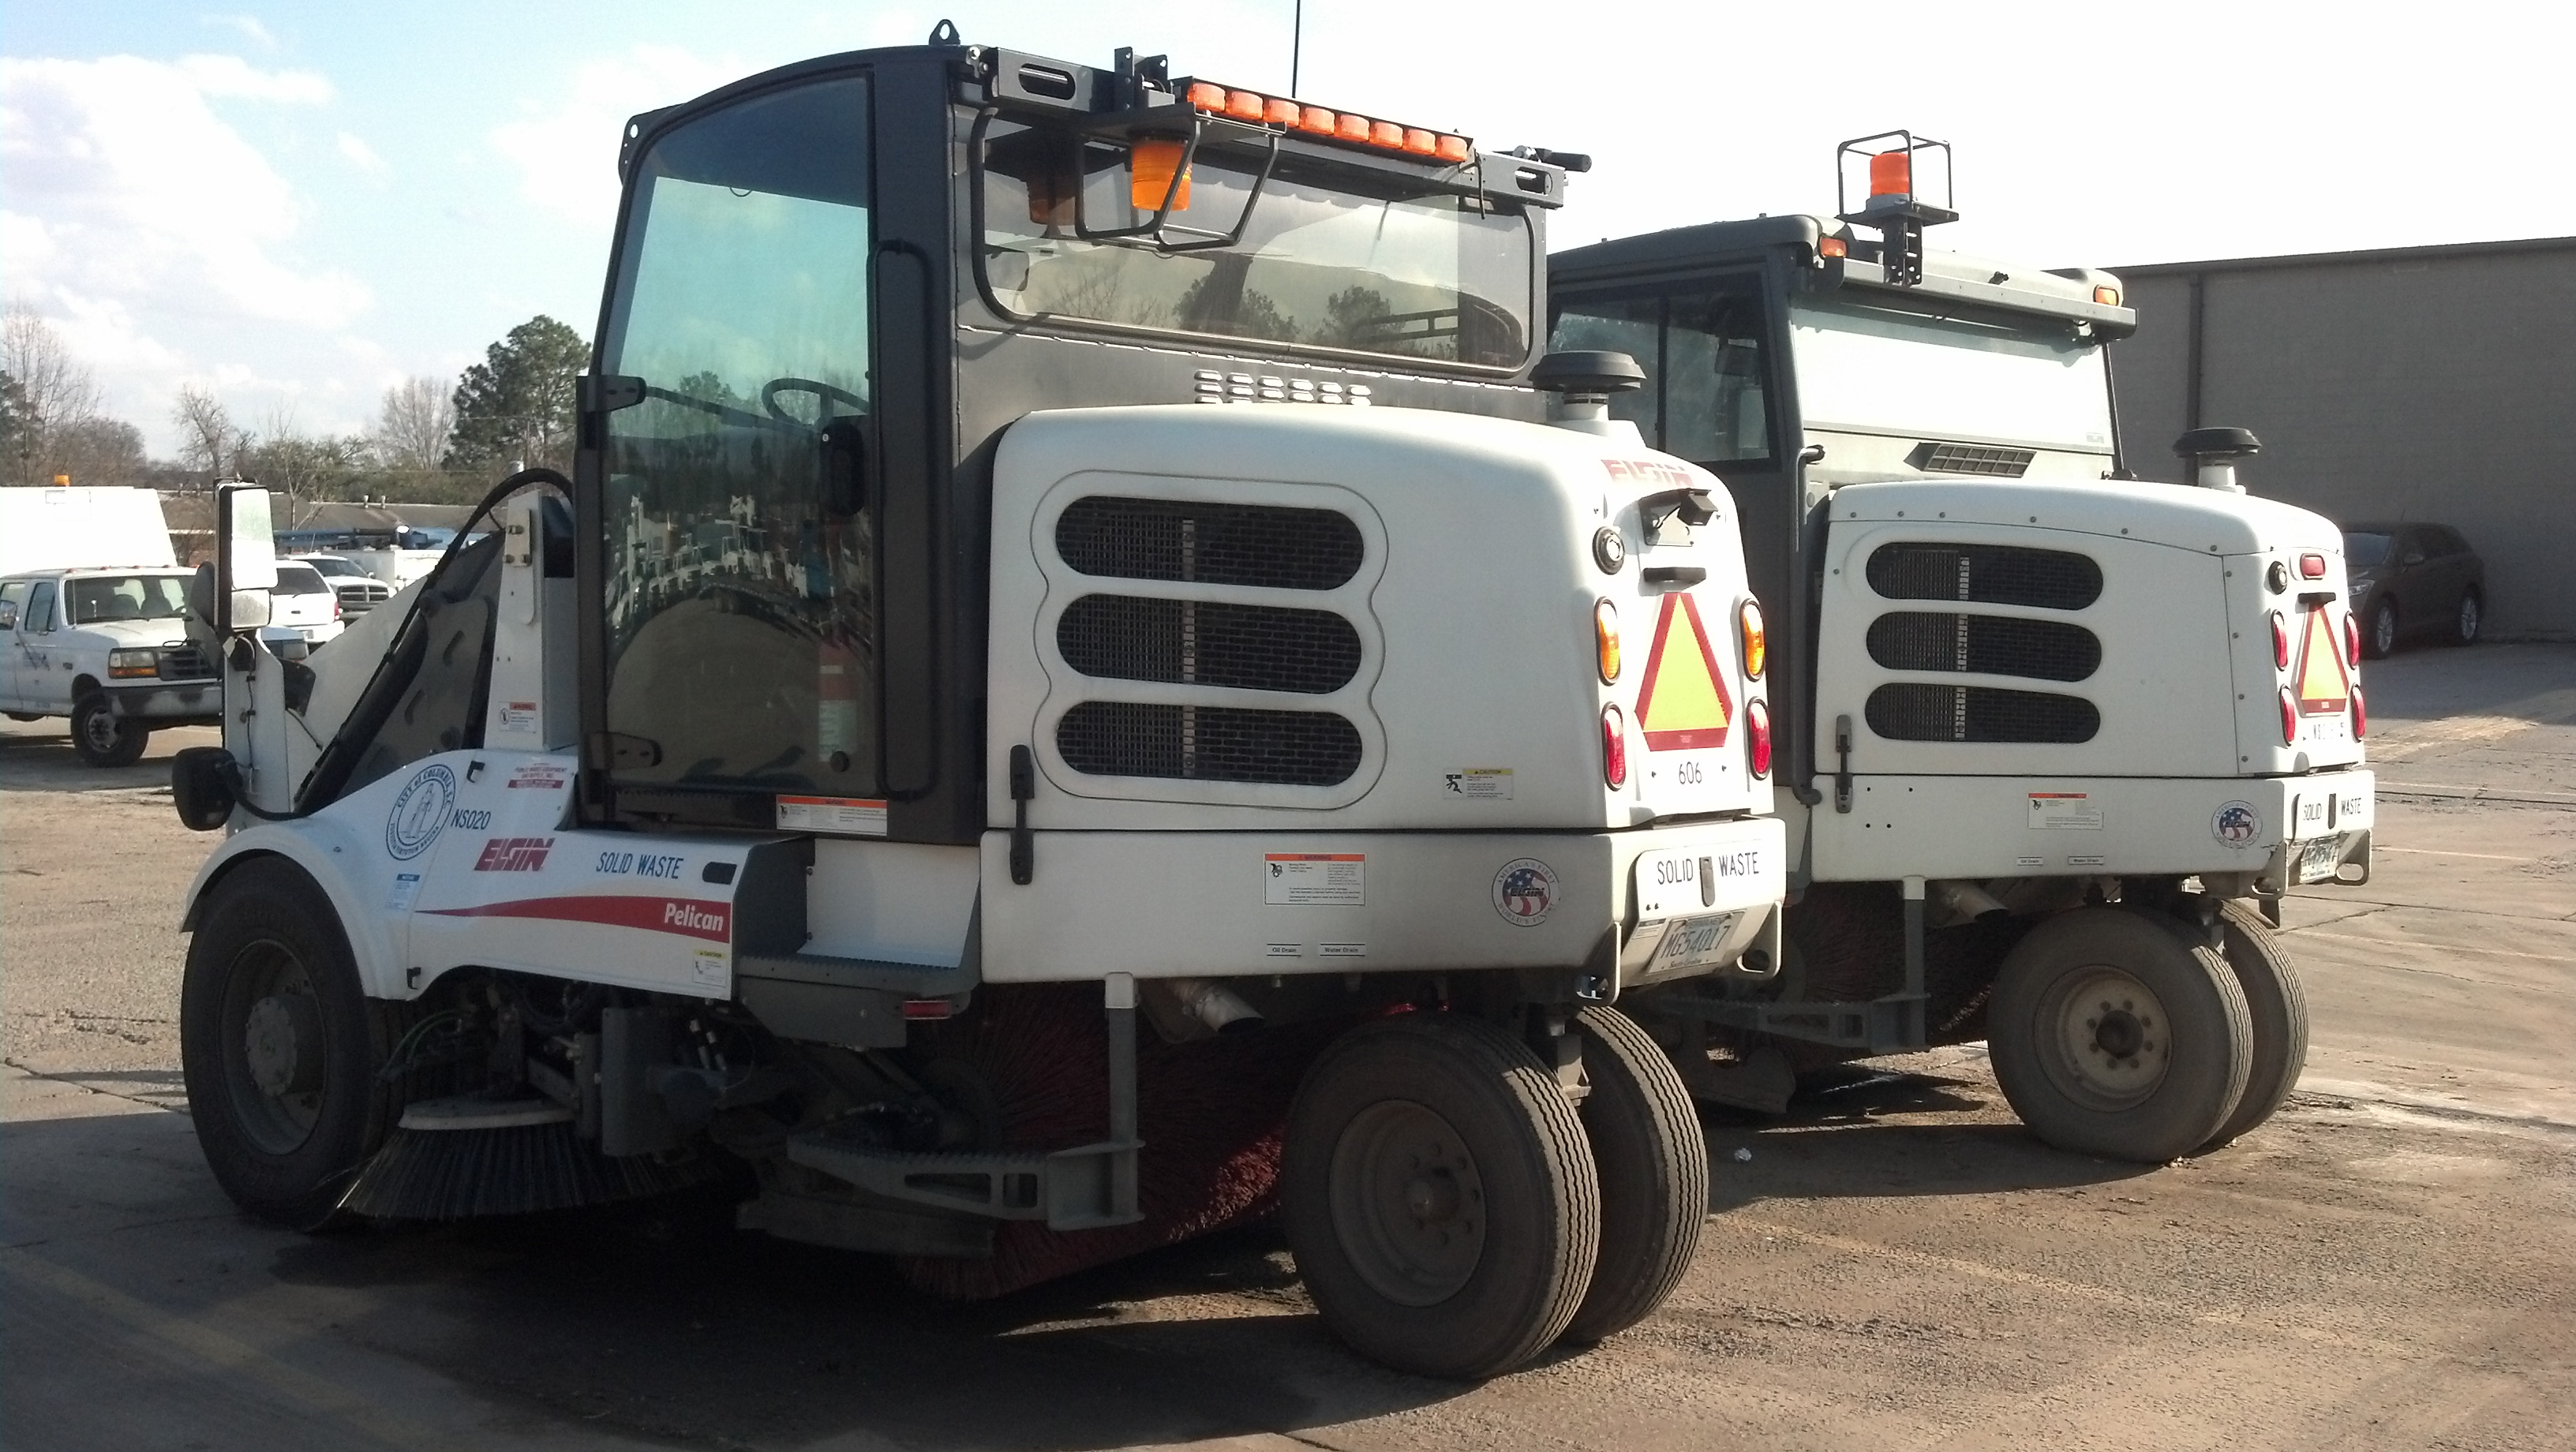 SWR Street Sweepers pic